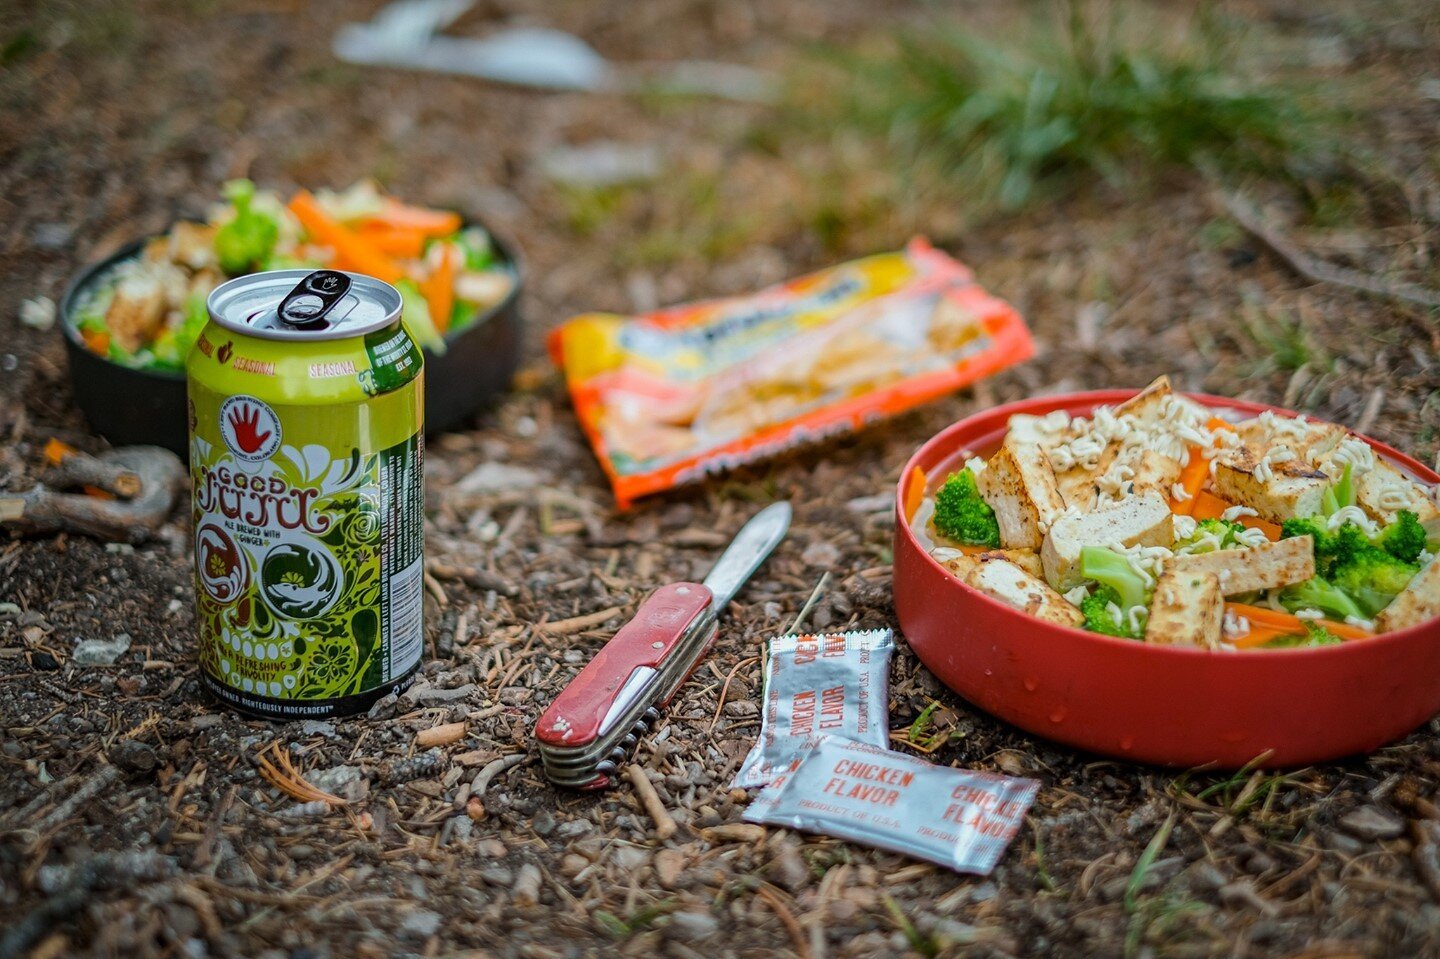 If you&rsquo;re anything like me, Top Ramen was (still is 🥴) a childhood staple. Though it overflows with sodium, there&rsquo;s no cheaper, quicker cold remedy out there. Top Ramen is also a favorite for backpacking - it&rsquo;s light and so dang ve